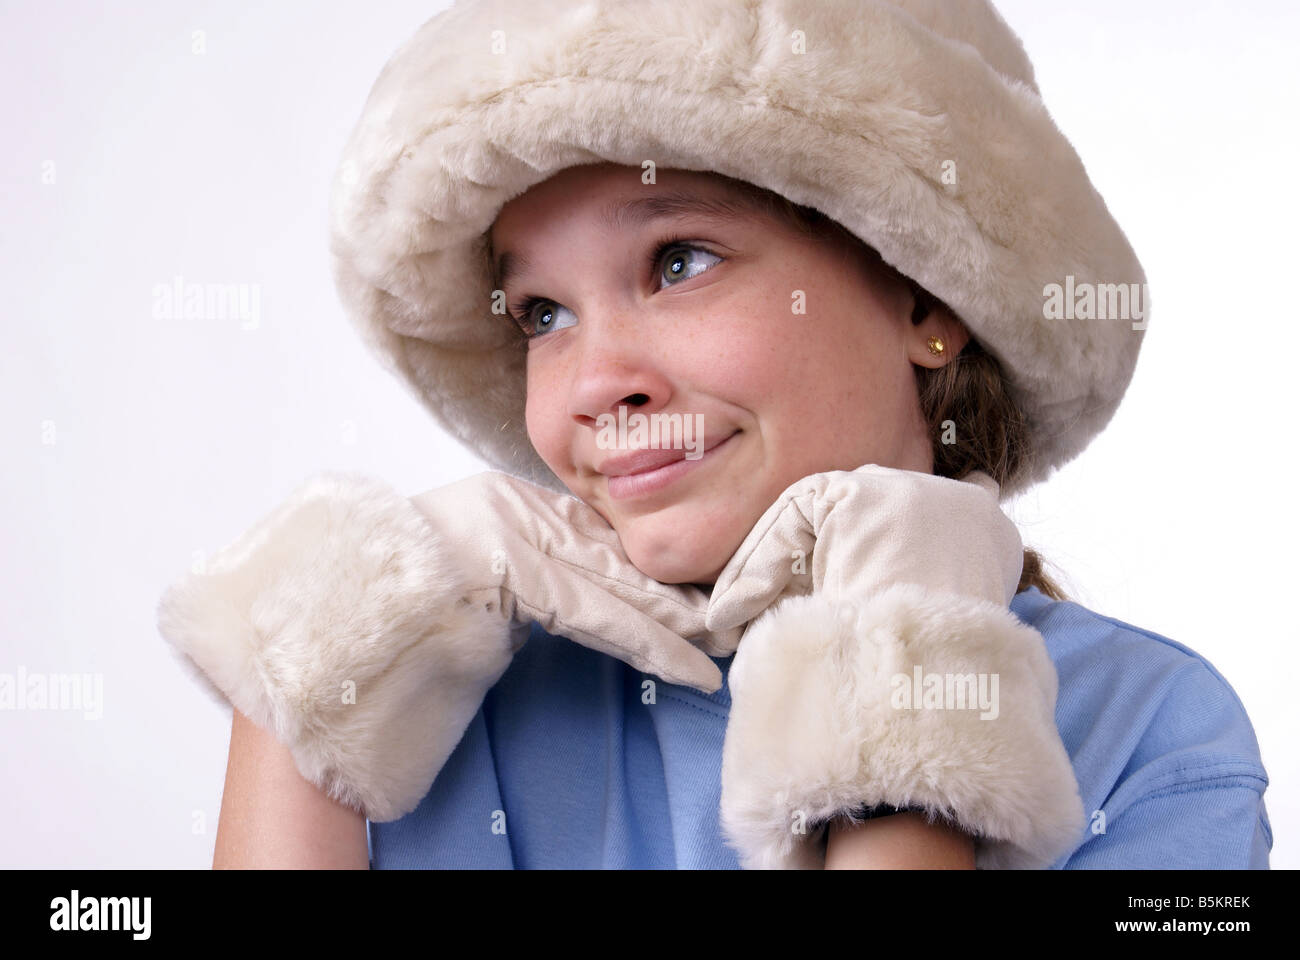 Girl Wearing Grownup Hat and Gloves Stock Photo